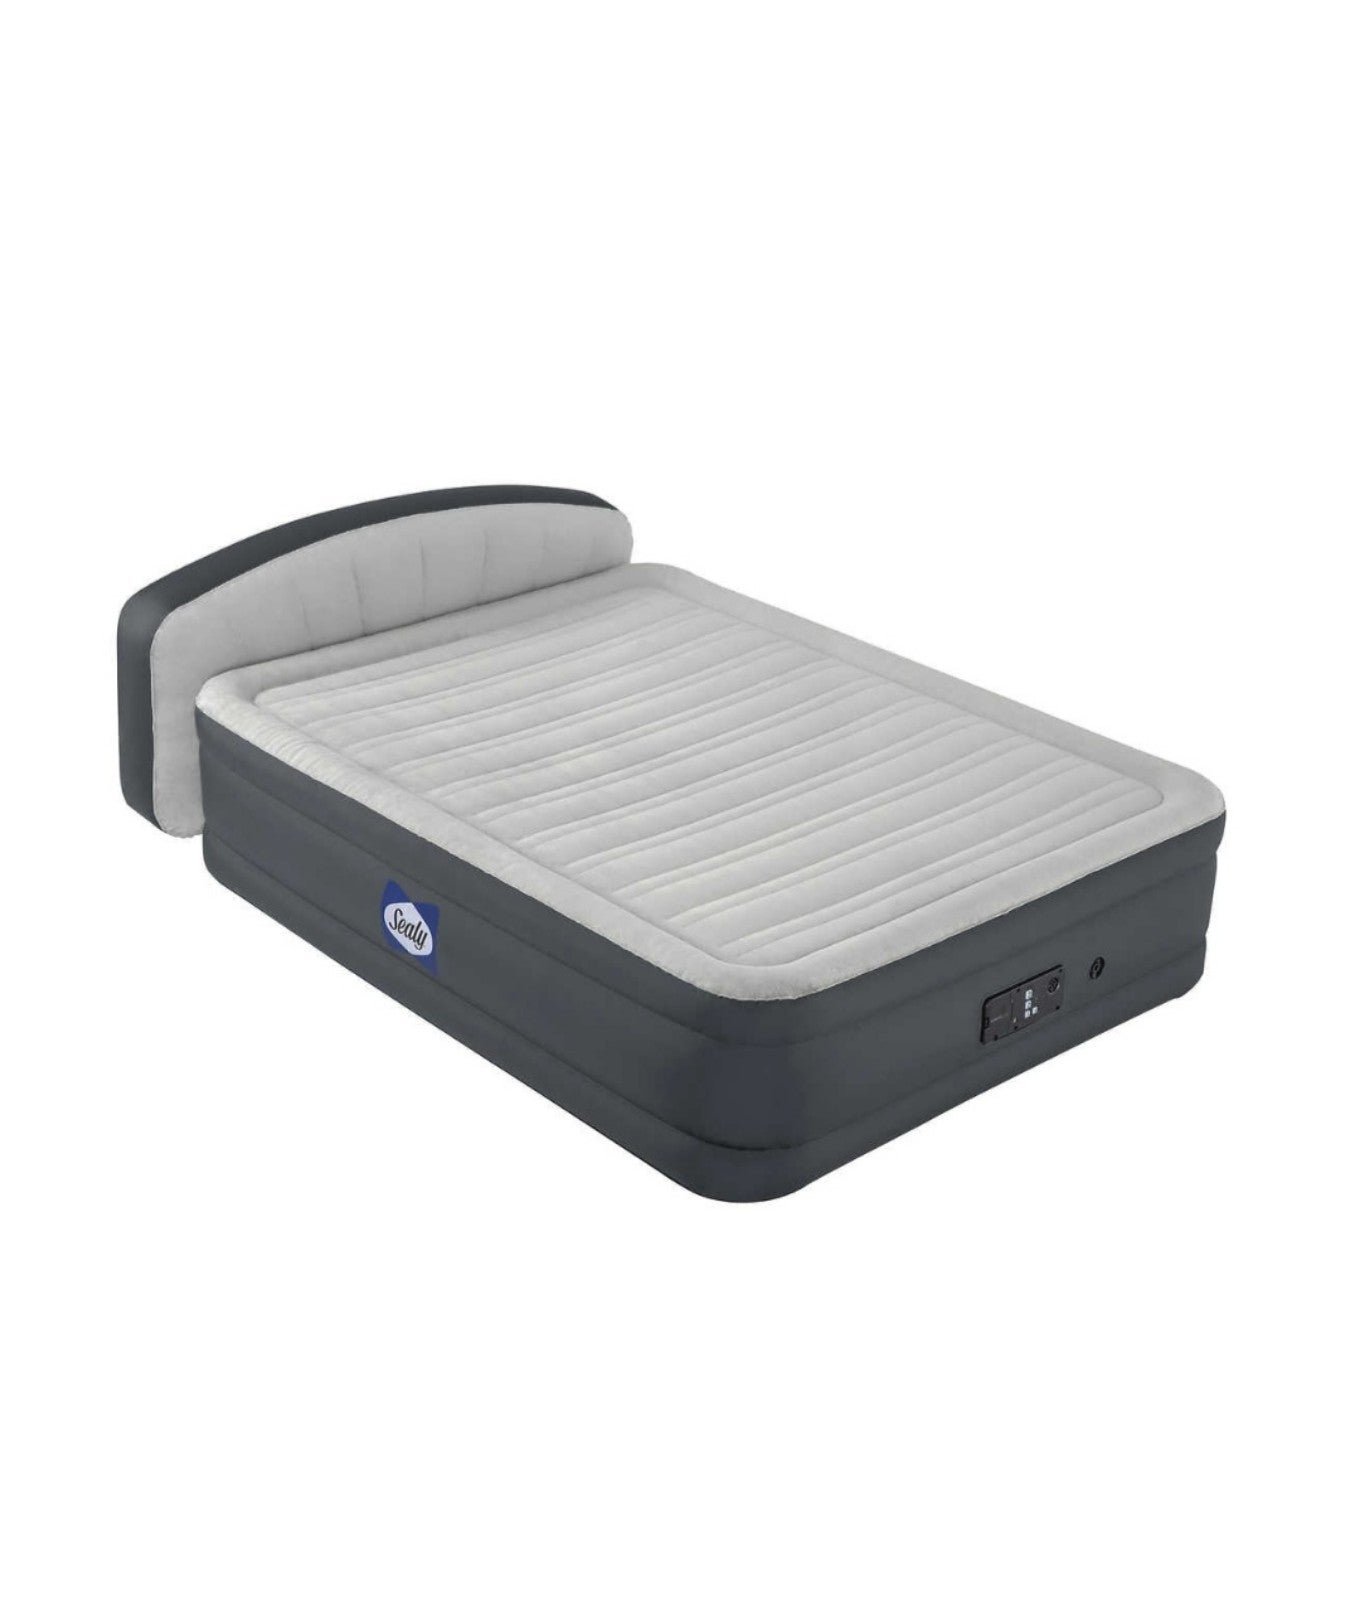 Sealy Alwayzaire Tough Guard 18 Airbed Queen CpBbOnyMM